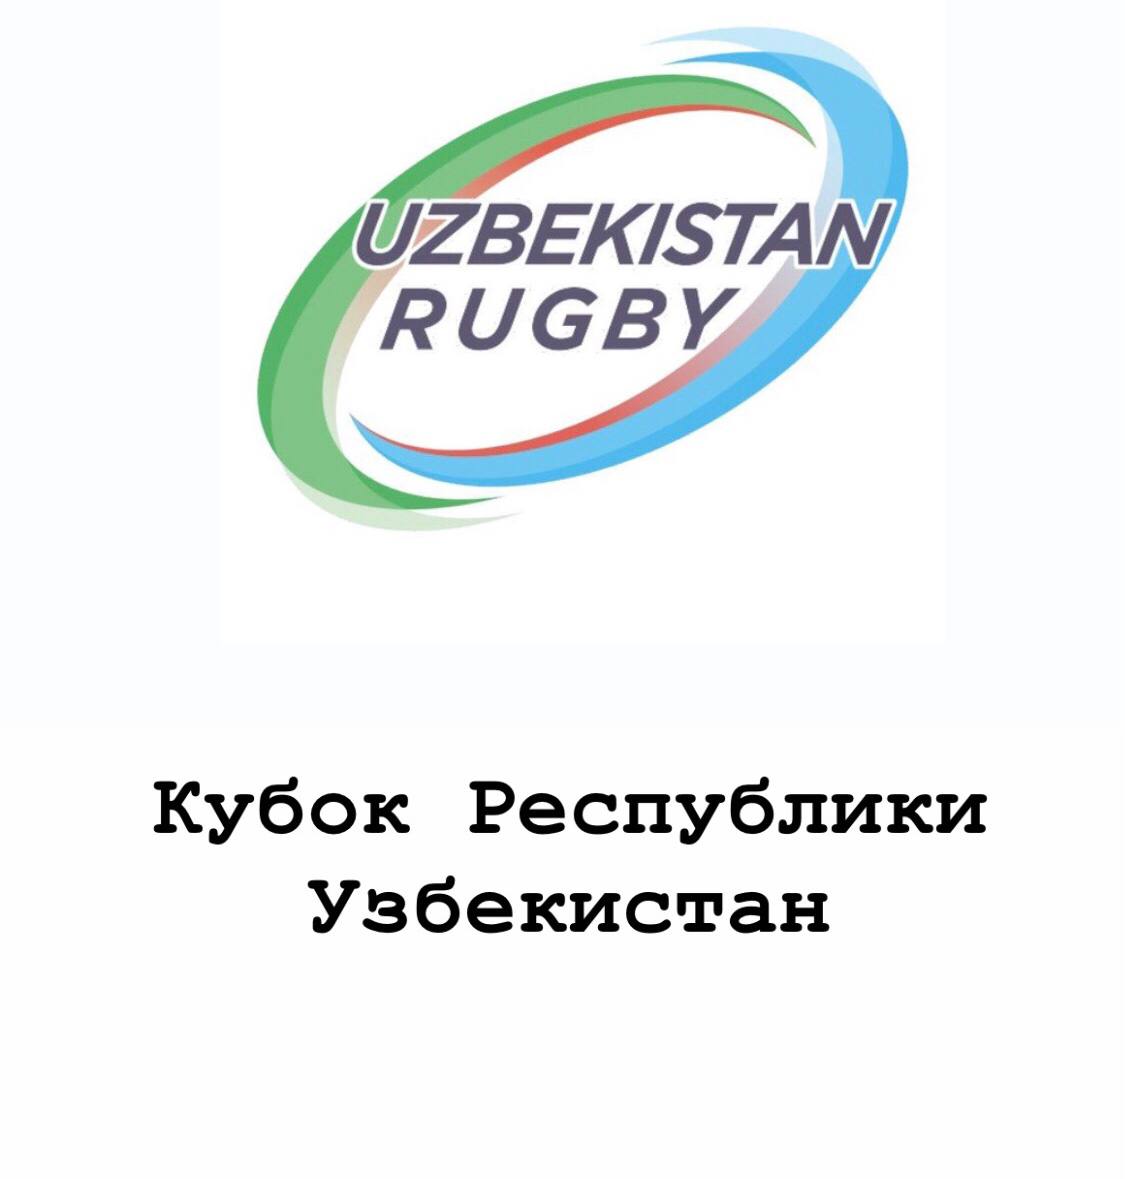 Rugby-7 Cup of the Republic of Uzbekistan starts tomorrow